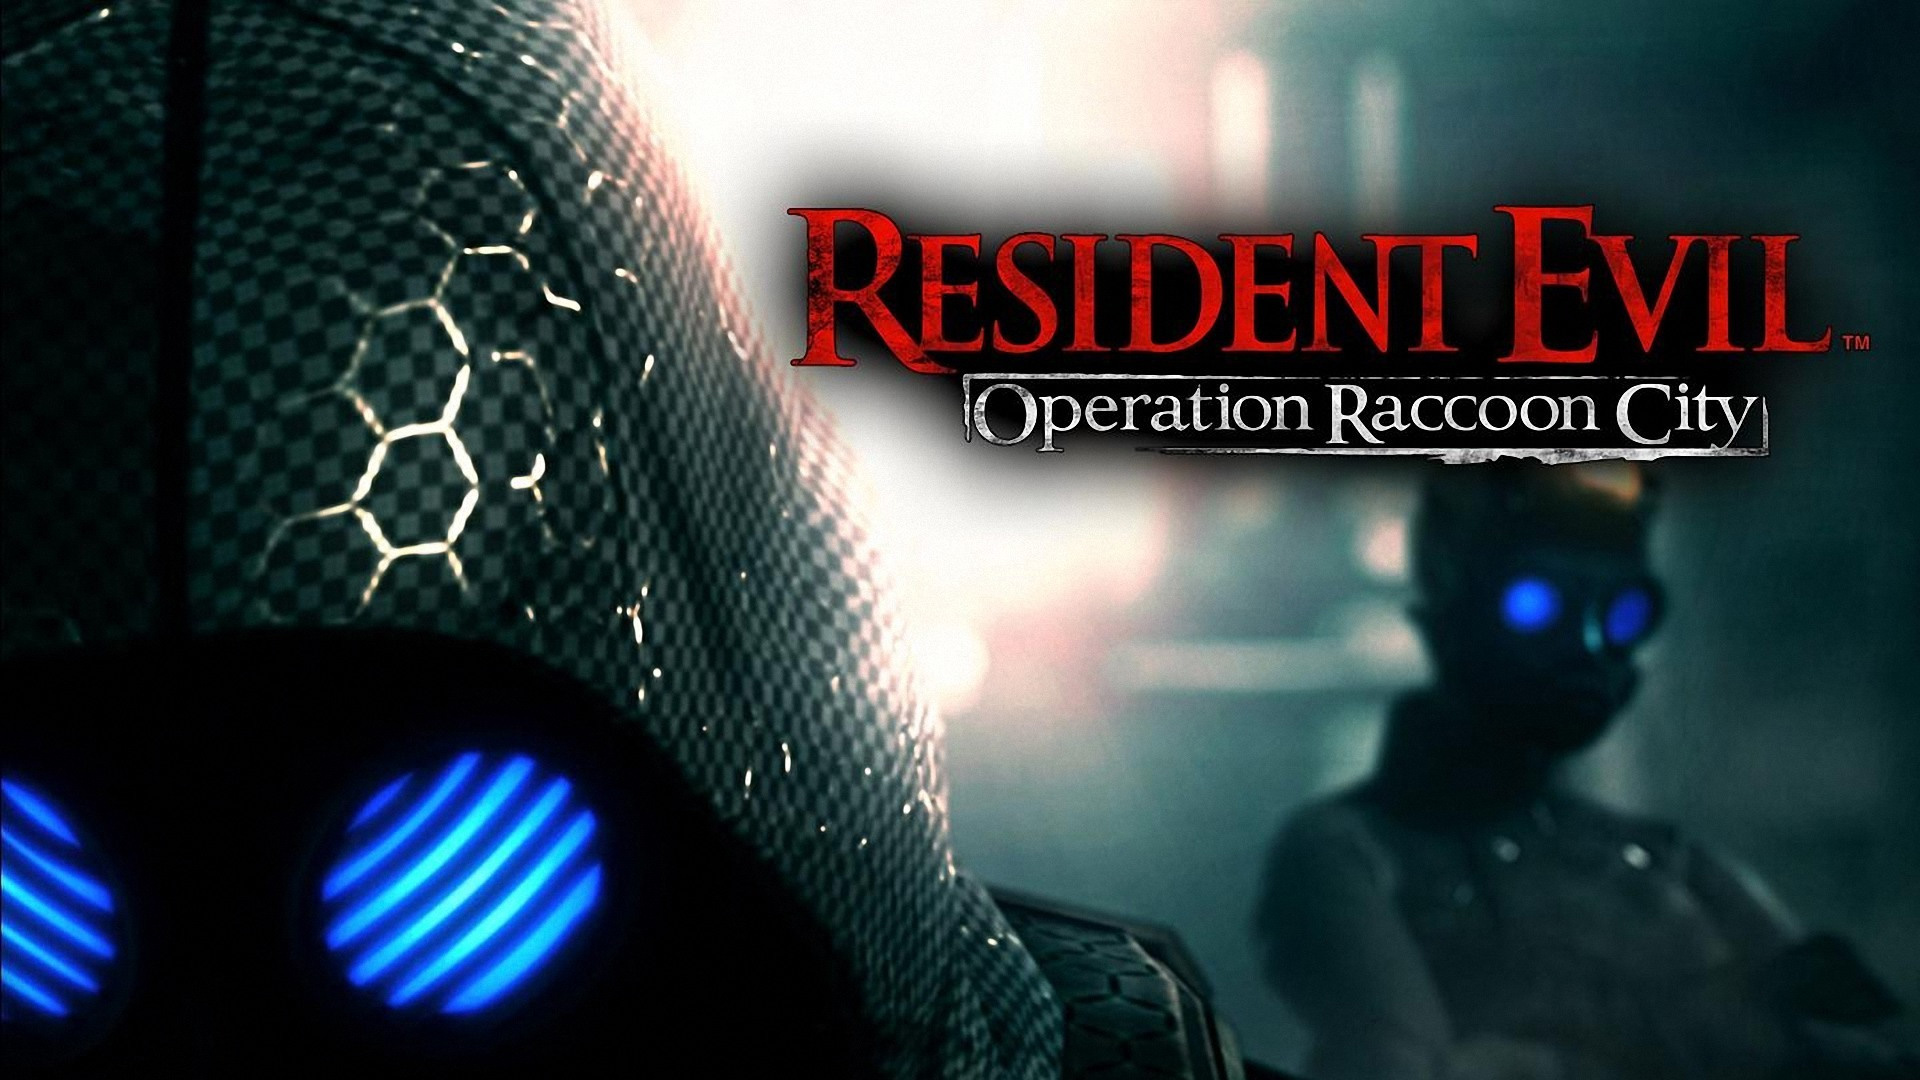 Let’s Play Resident Evil: Operation Raccoon City